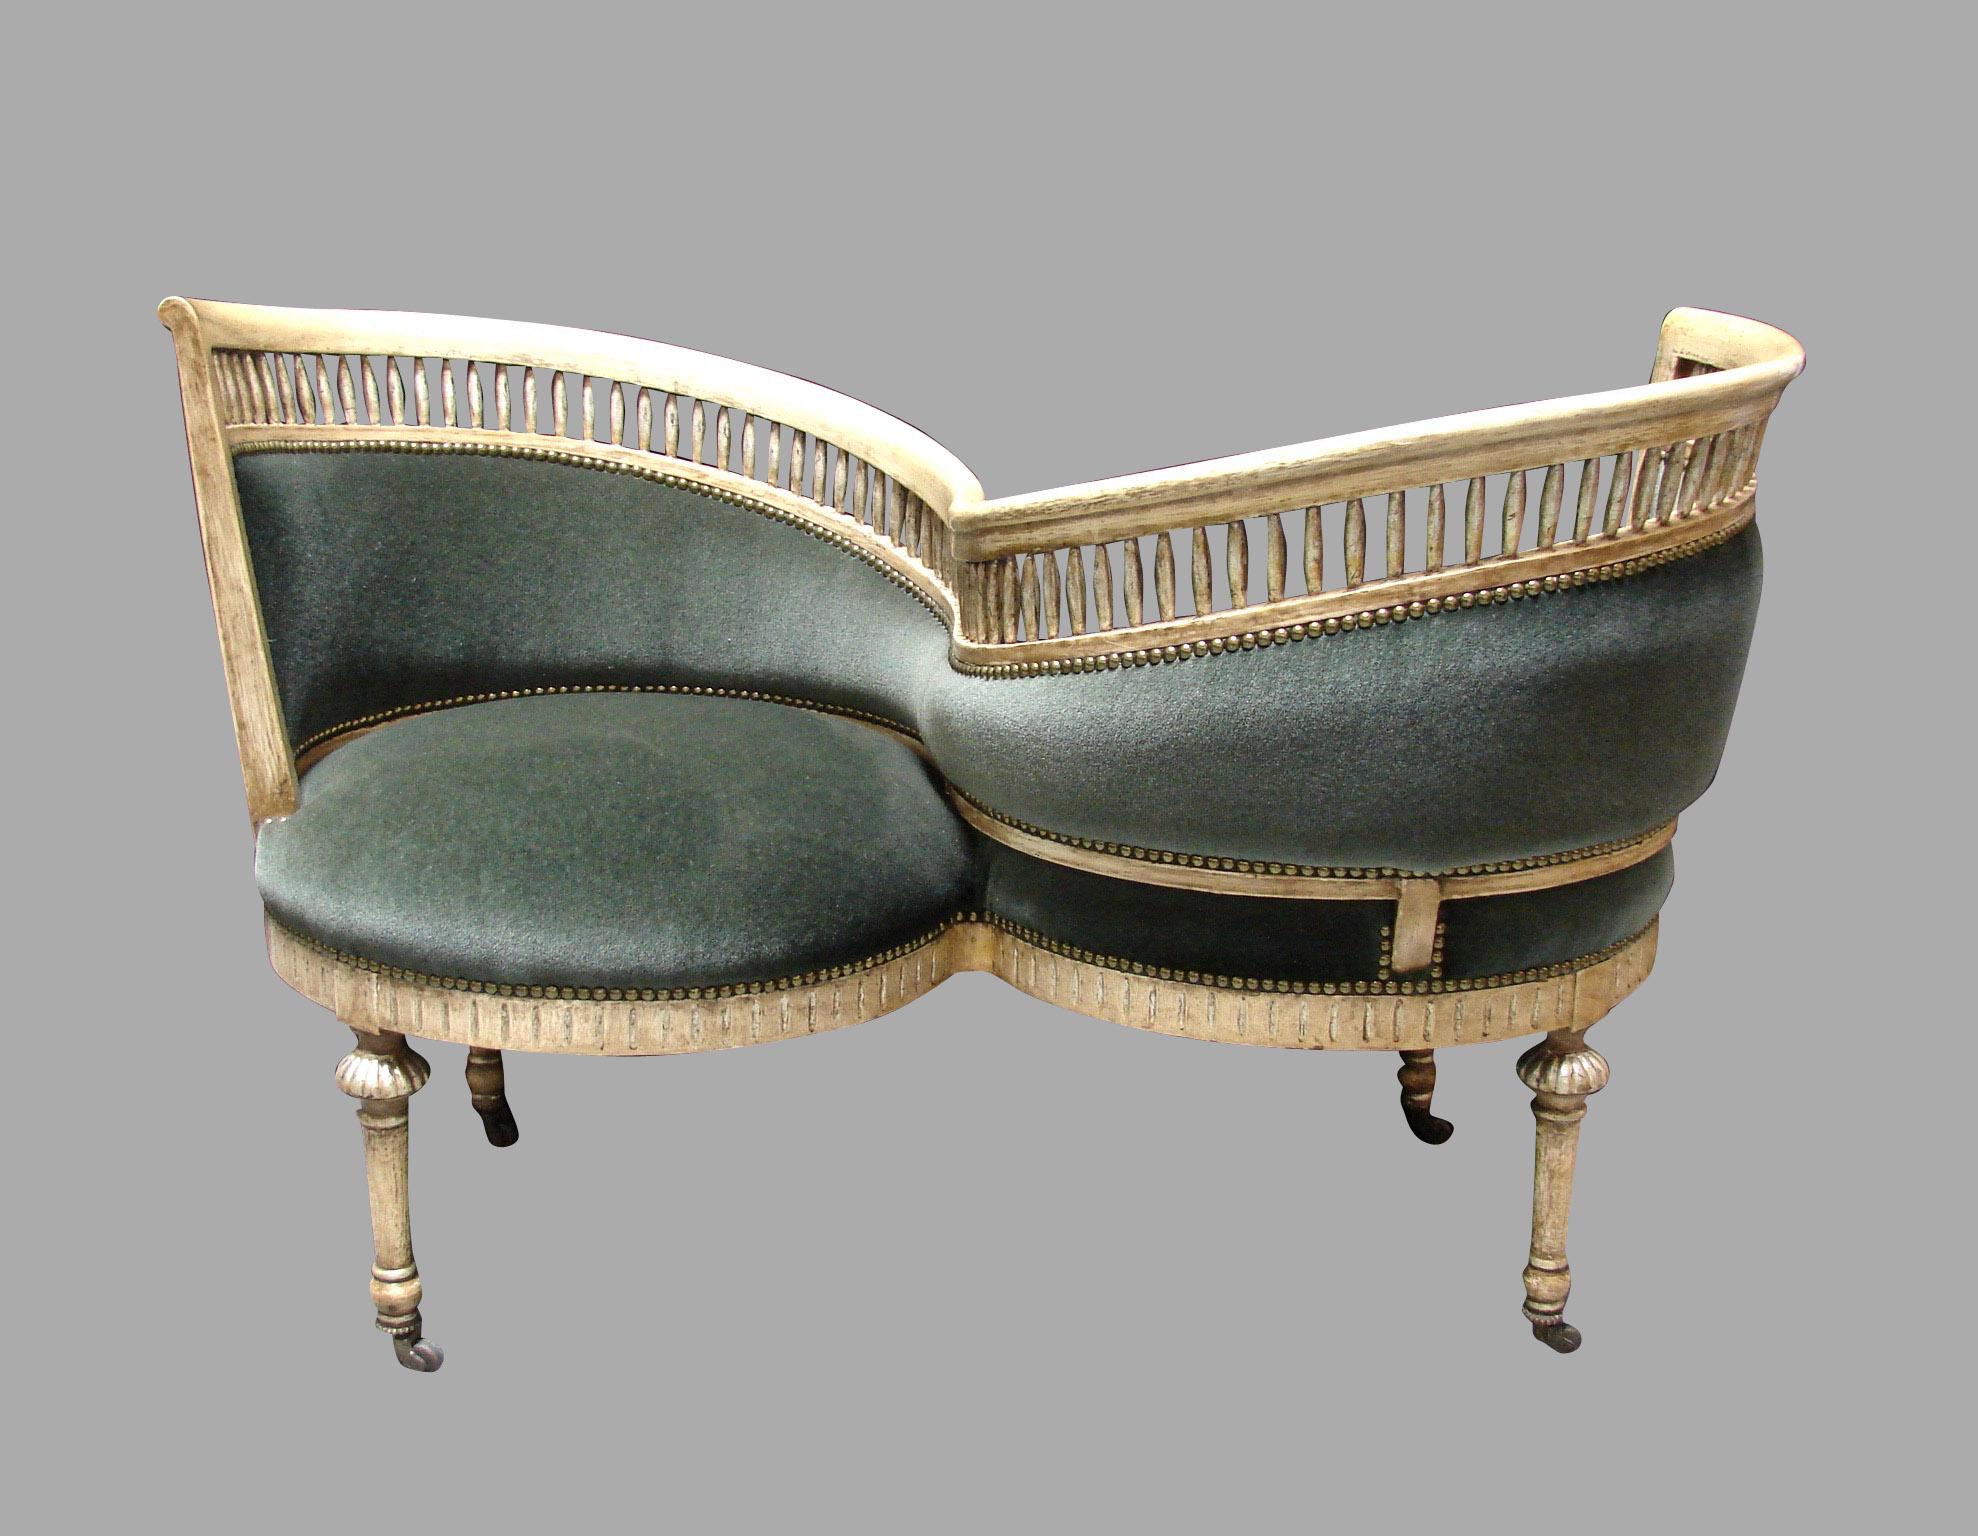 An elegant Italian parcel-gilt cream paint decorated serpentine form sociale or tete a tete, the spindle form top rail over a greyish green mohair upholstered back and seat, finished with nailhead trim over a carved seat rail supported on round